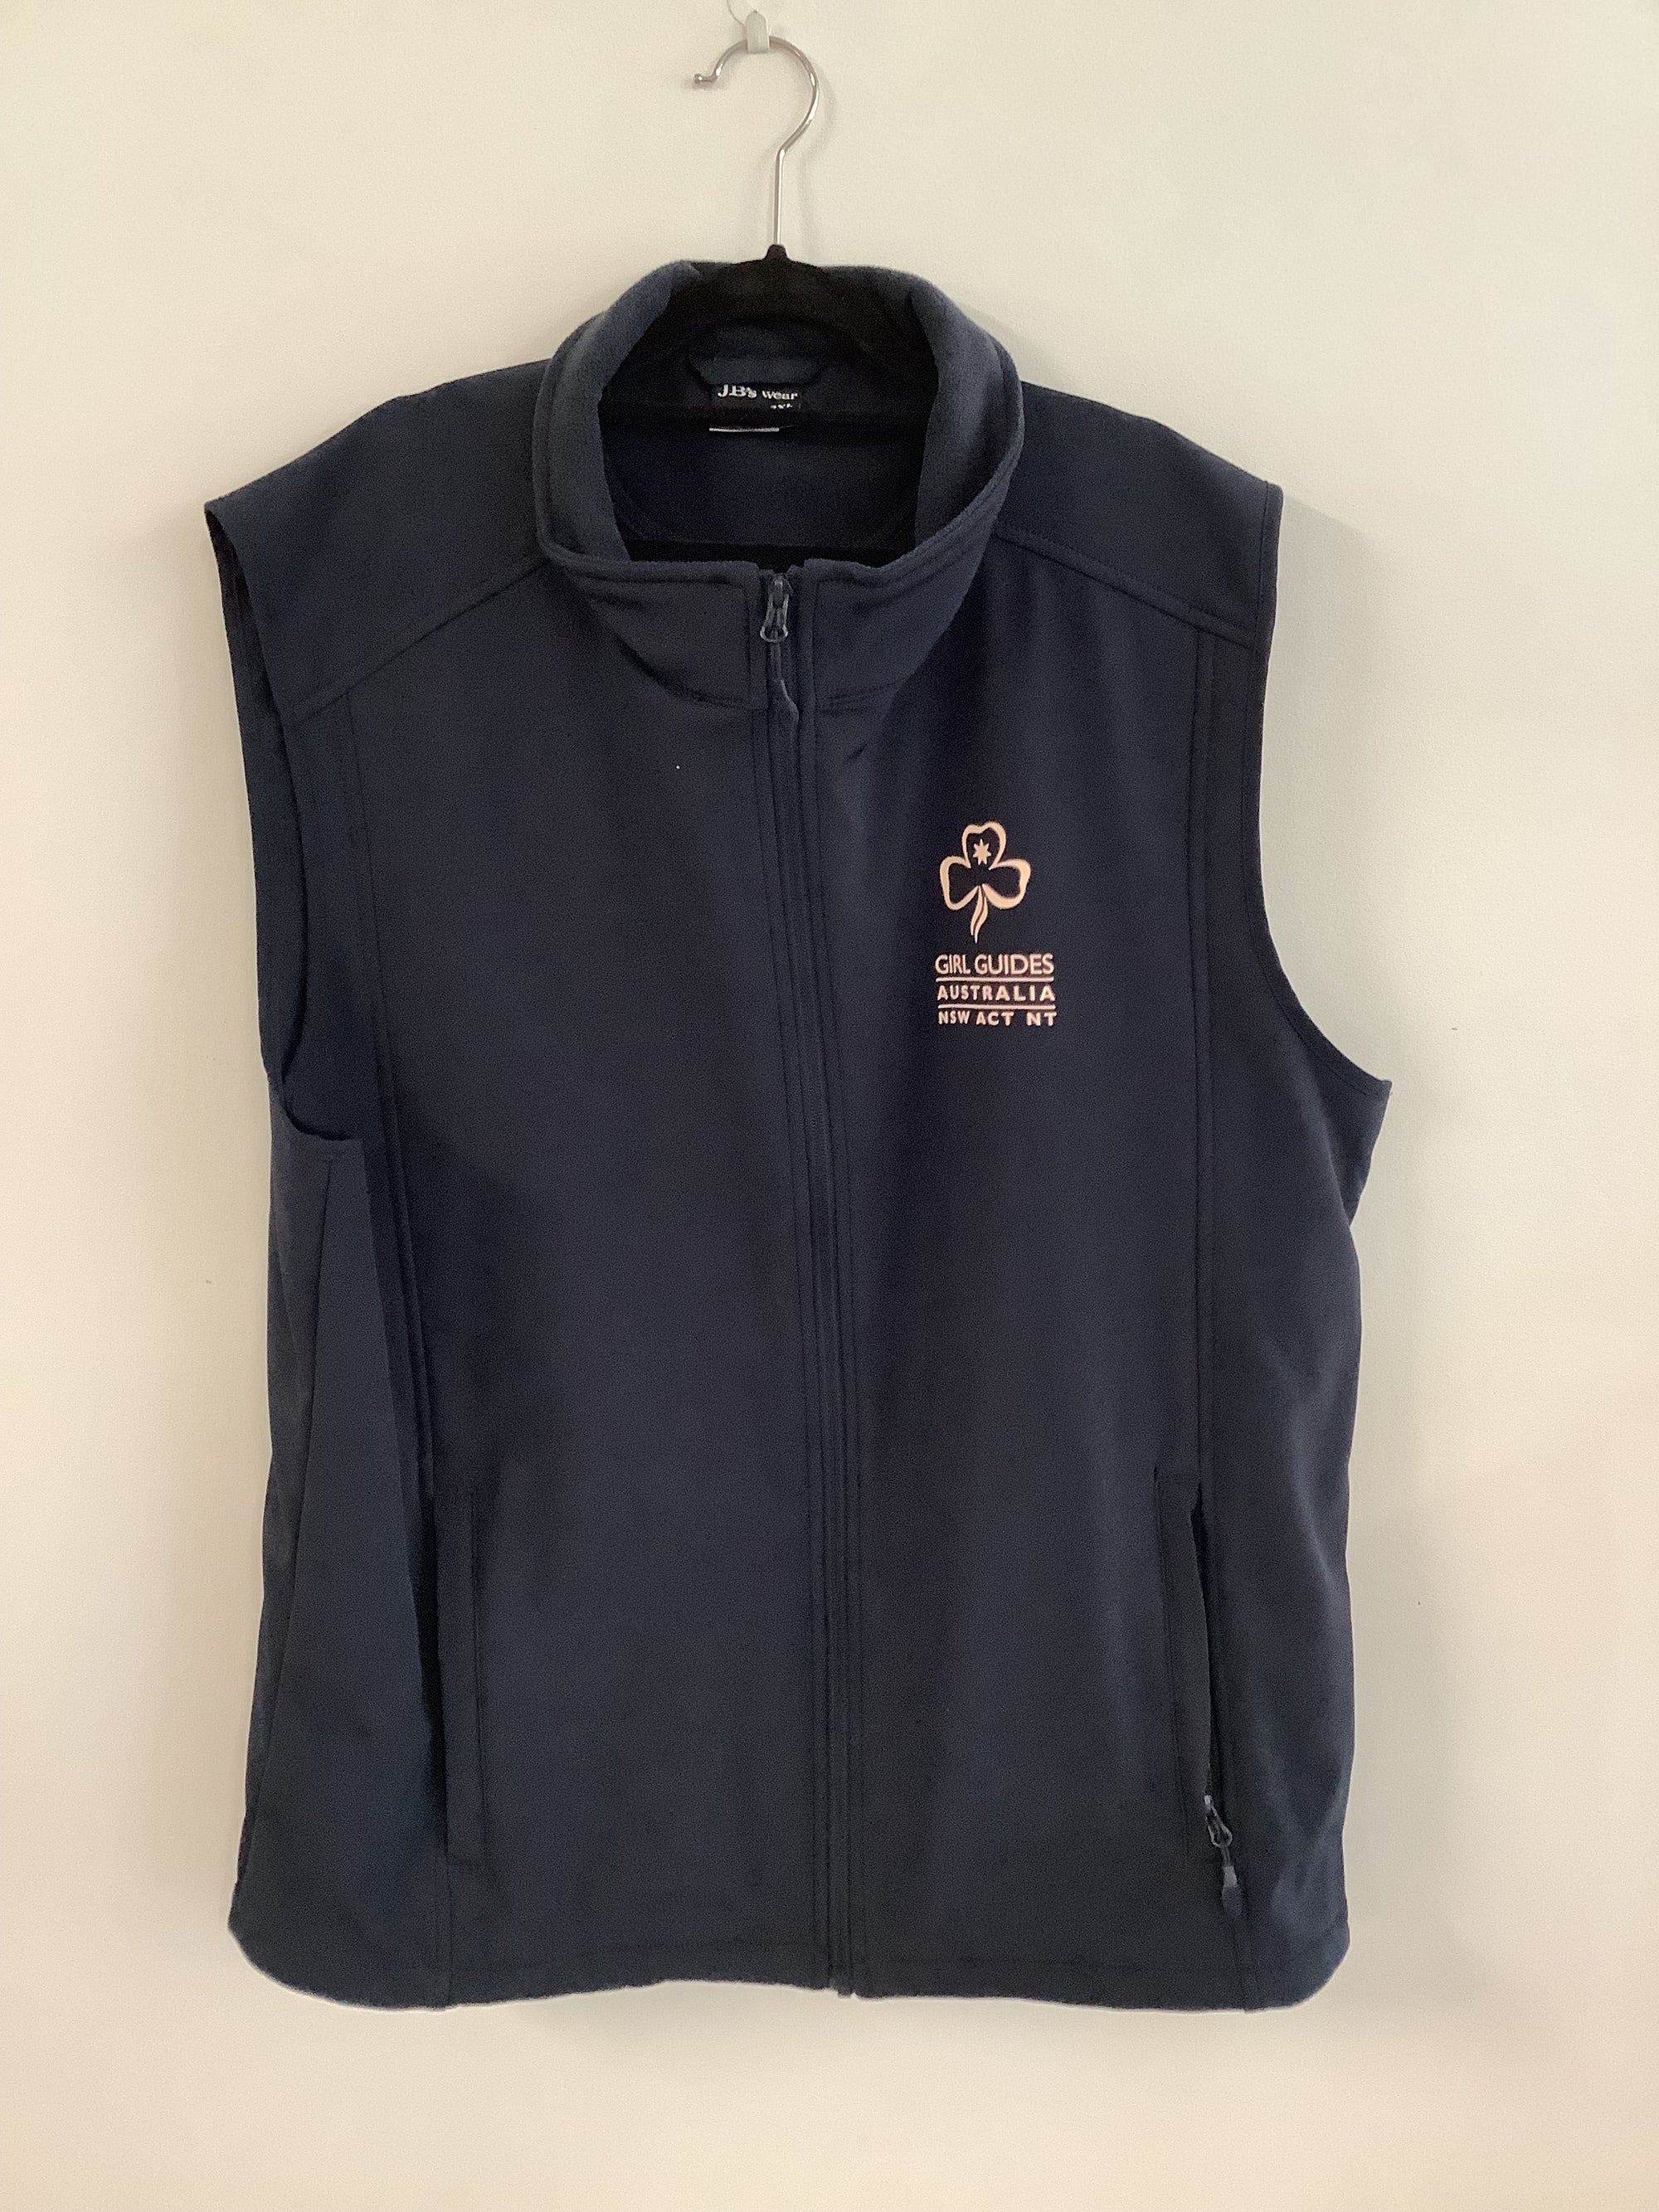 a navy blue vest with Girl Guides Australia NSW ACT NT